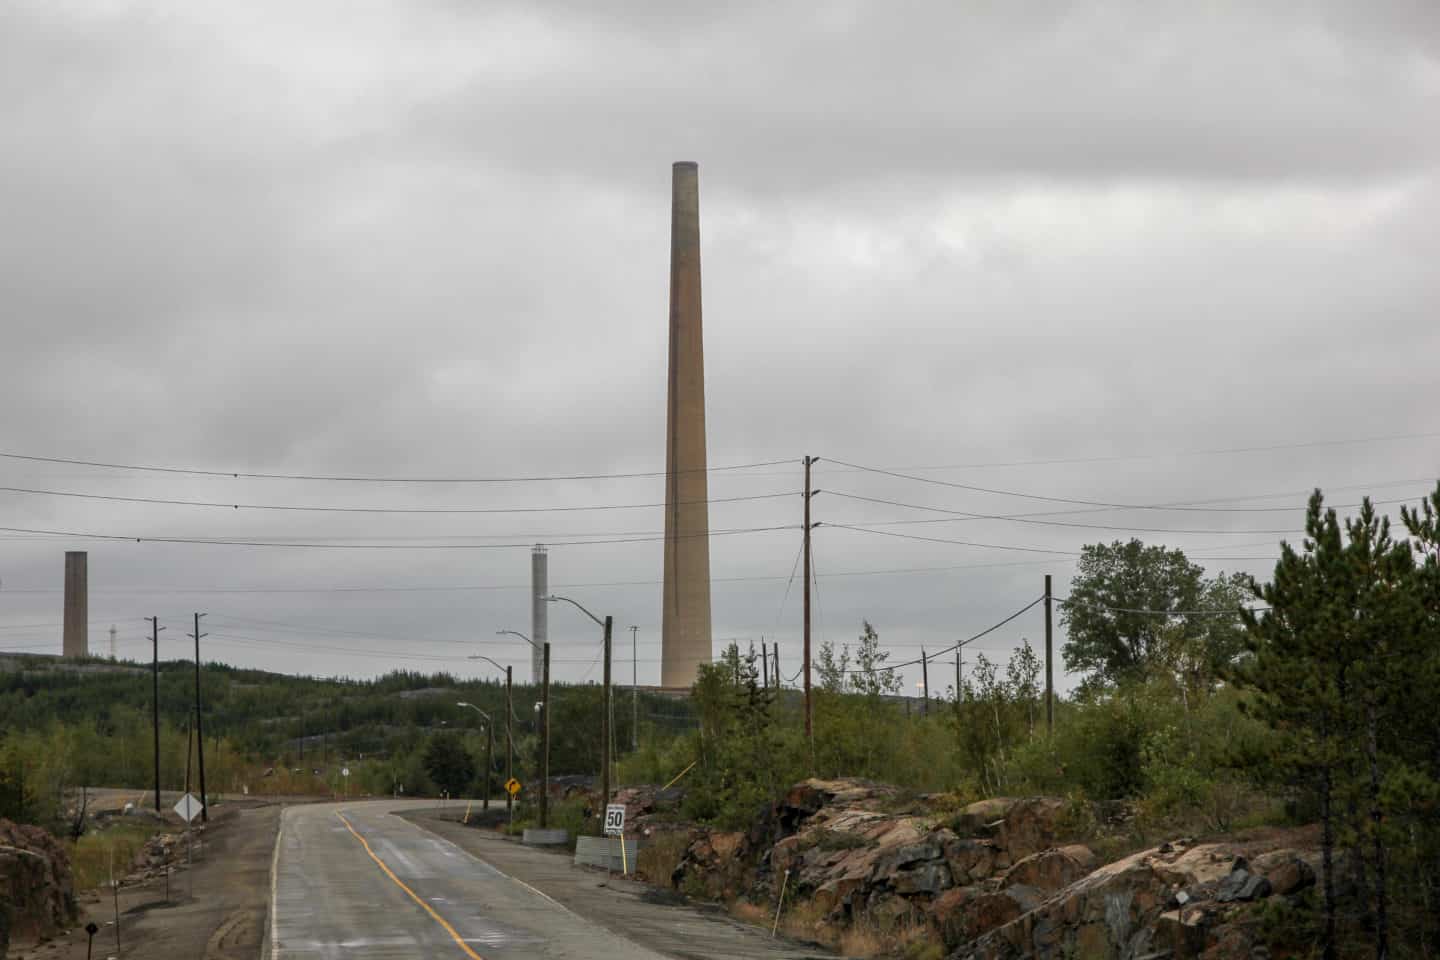 Checking out the tallest chimney stack is one of the things to do in Sudbury